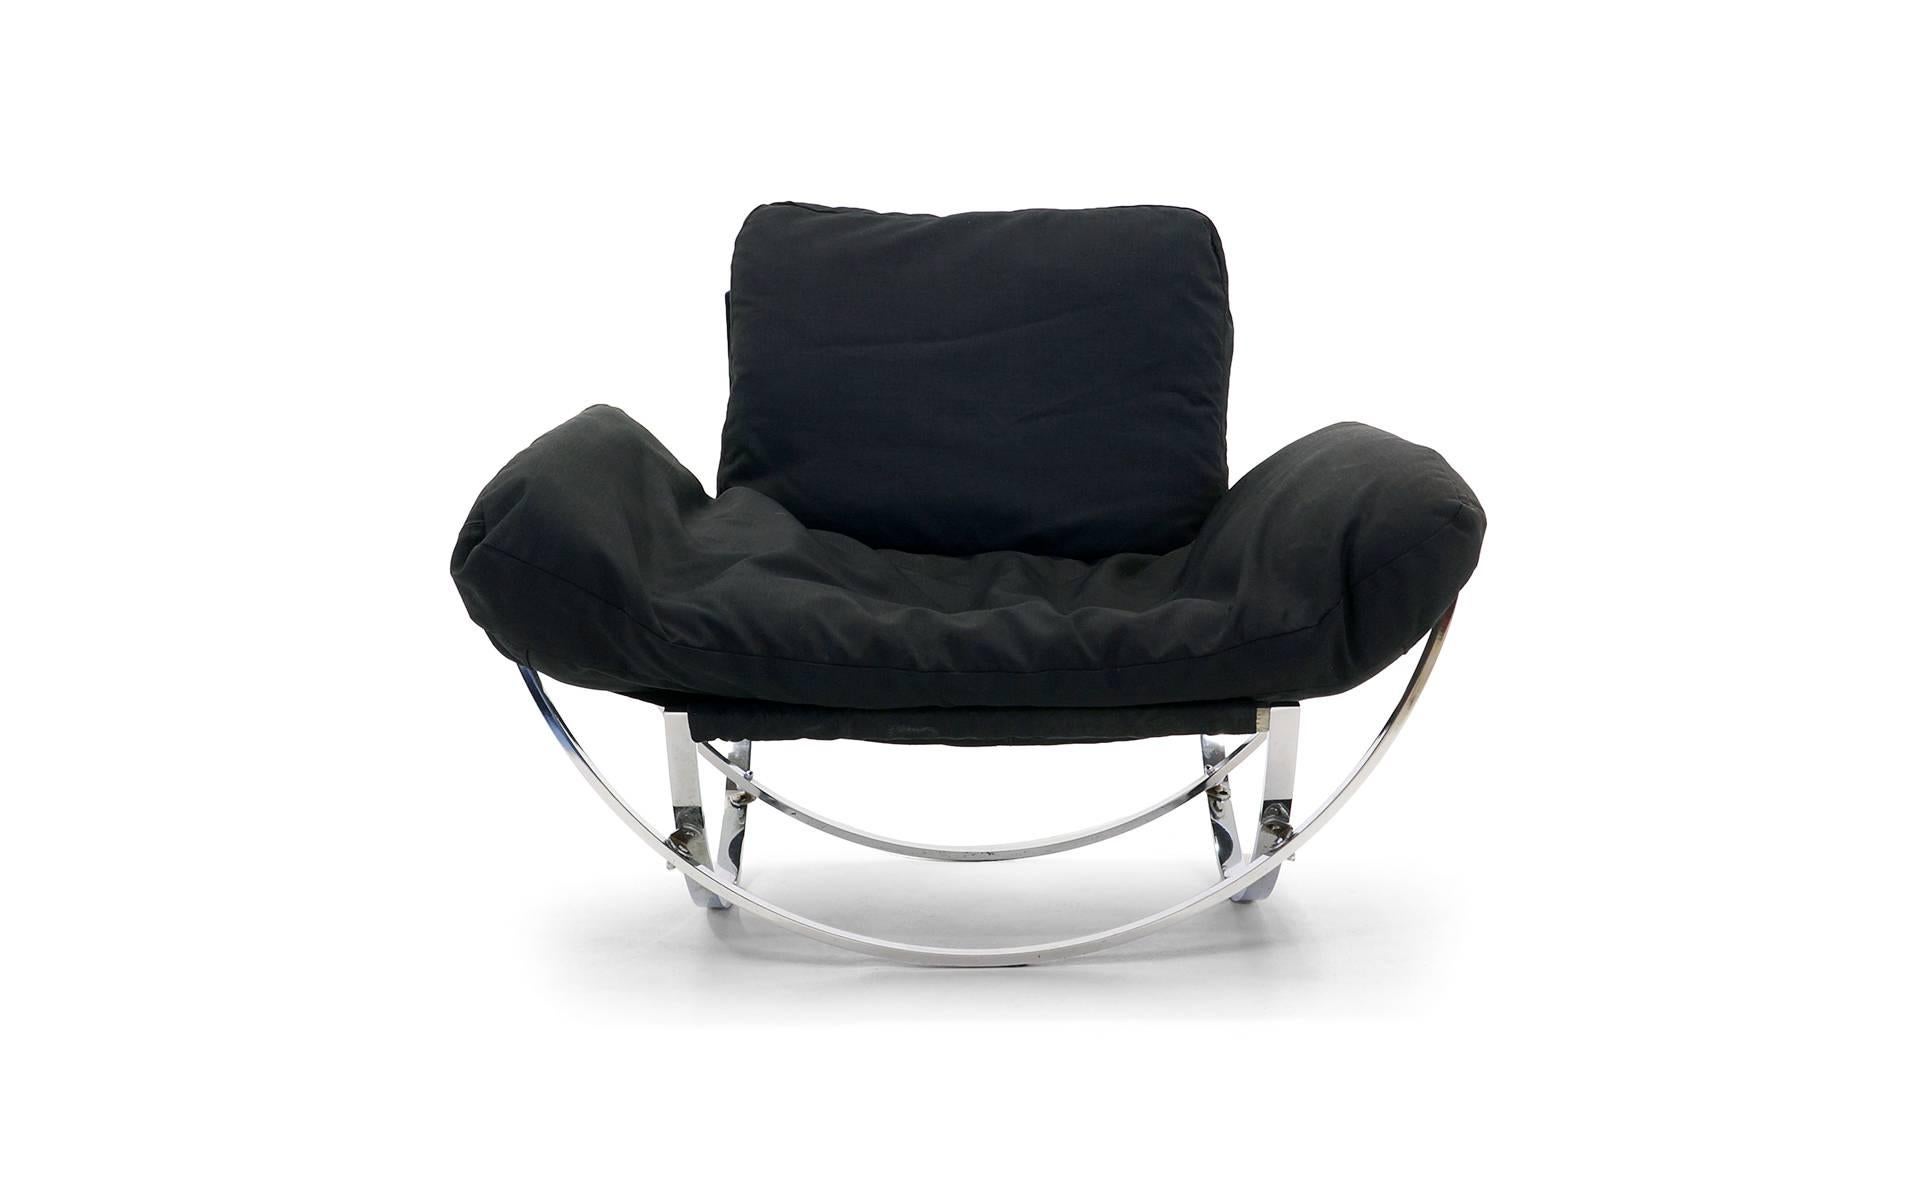 ‘Apollo’ chair designed by Leonnart Bender for the Charlton Company (Leominster, MA) for their Century 21 collection, Model No.150 c.1970s.  Similar in style to designs by Milo Baughman.  Heavy duty, very high quality, curvilinear chromed steel